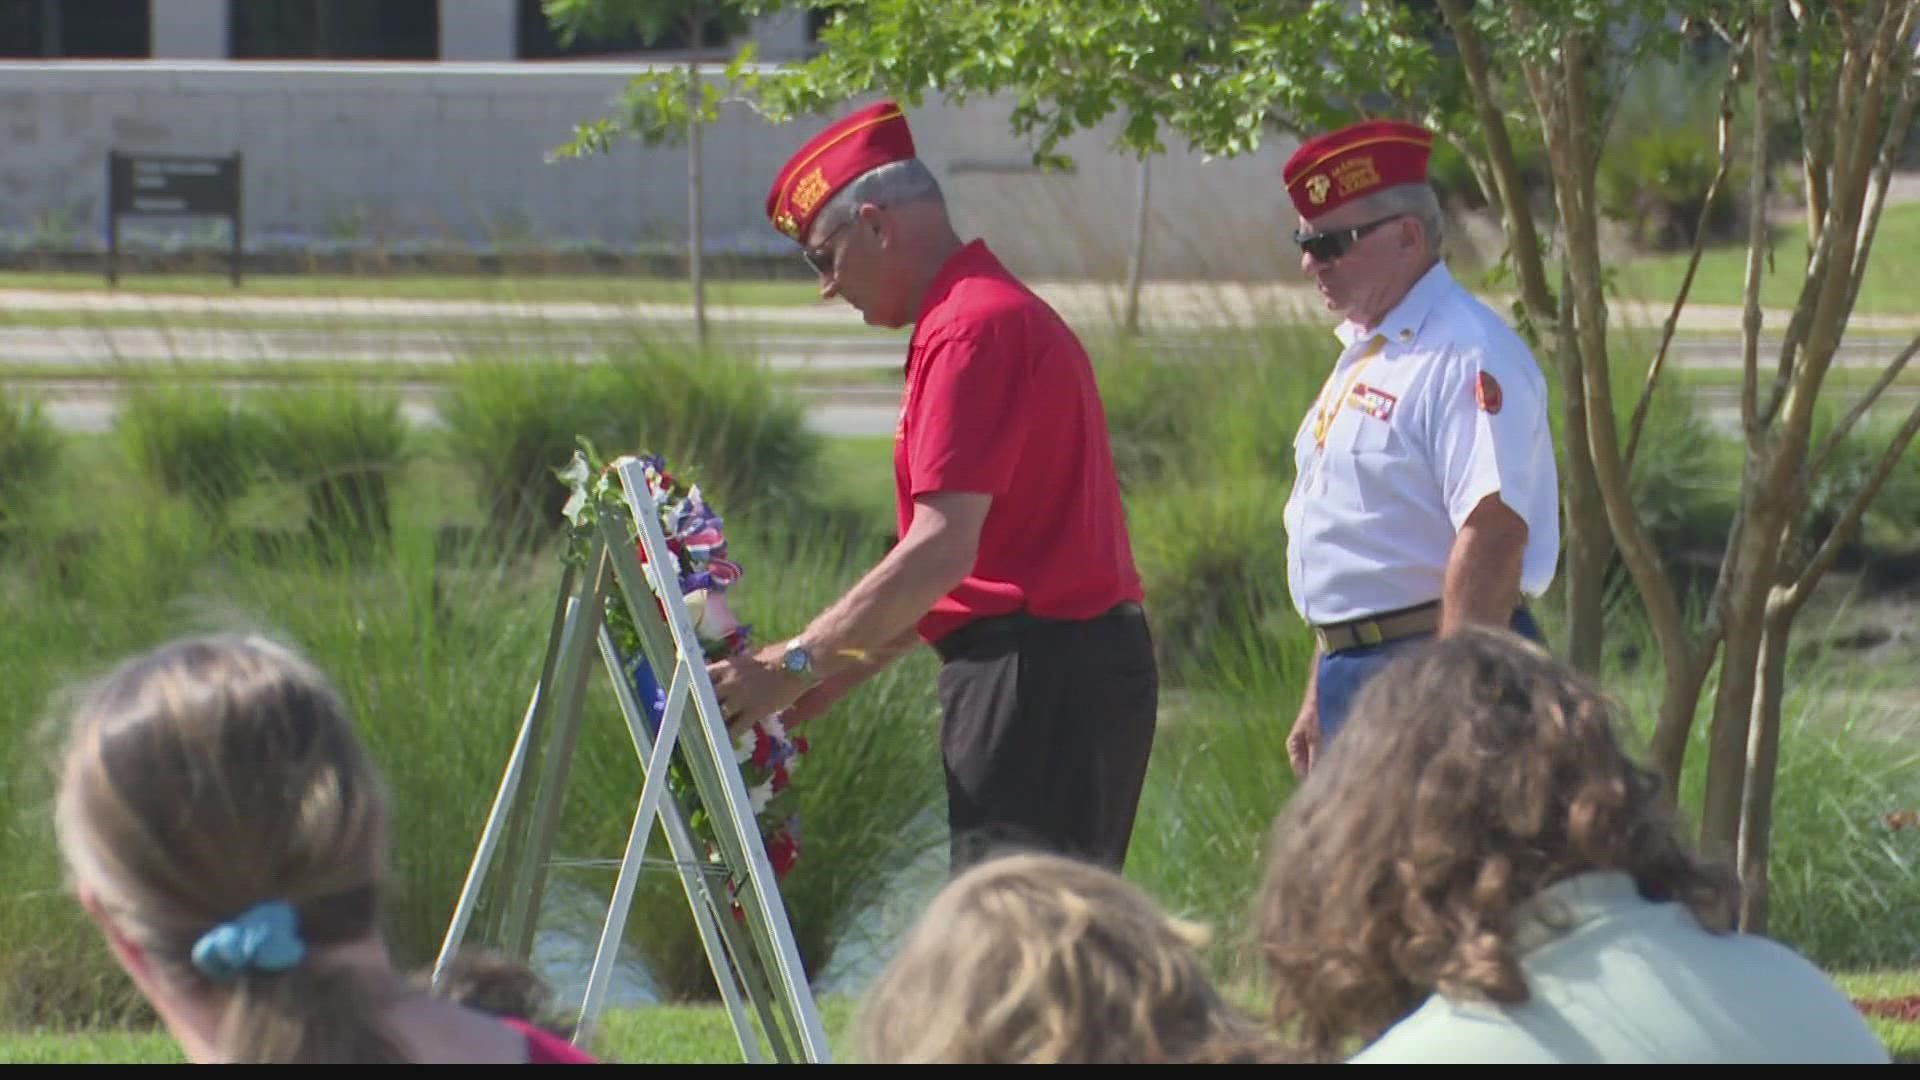 Jacksonville National Cemetery held a Memorial Day observance ceremony Saturday morning. It honored fallen military members and their families.